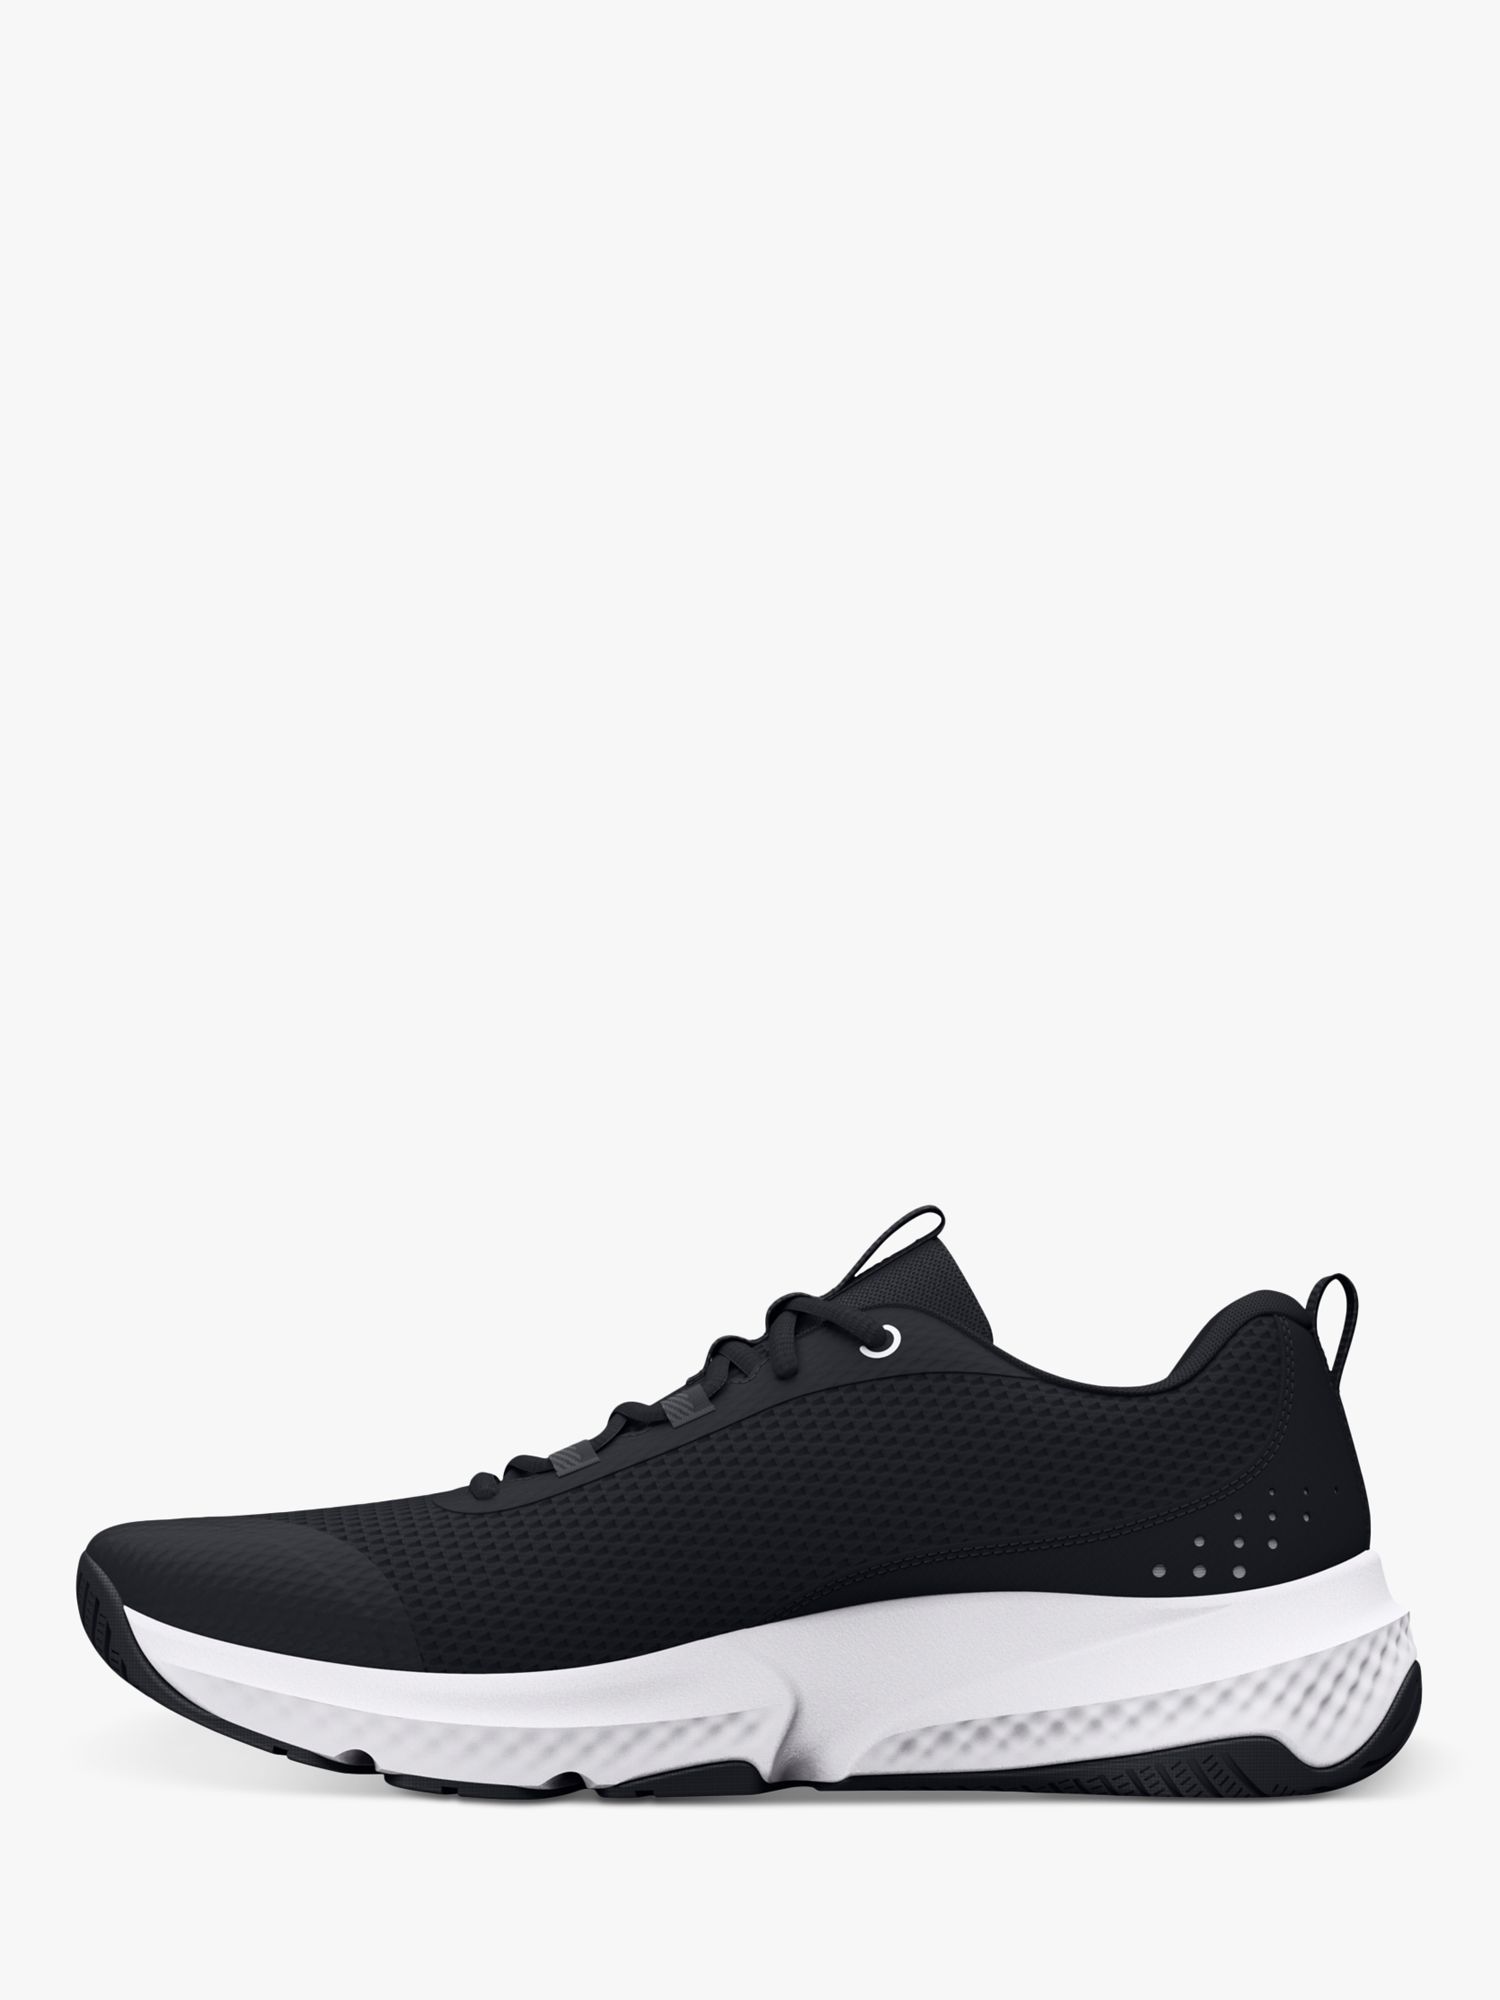 Buy Under Armour Dynamic Select Women's Cross Trainers Online at johnlewis.com